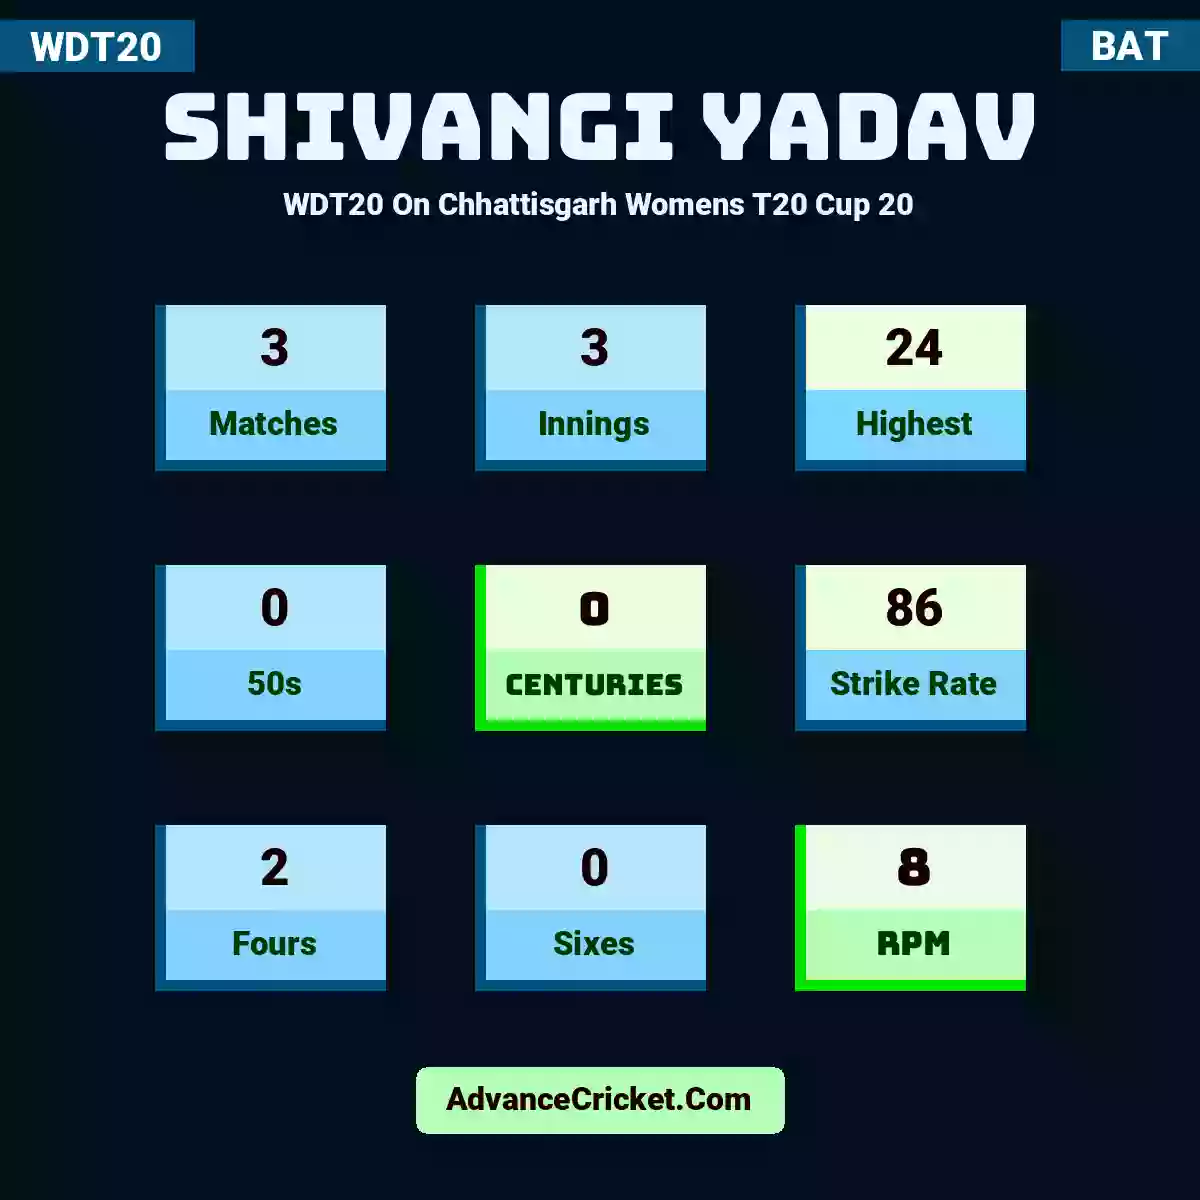 Shivangi Yadav WDT20  On Chhattisgarh Womens T20 Cup 20, Shivangi Yadav played 3 matches, scored 24 runs as highest, 0 half-centuries, and 0 centuries, with a strike rate of 86. S.Yadav hit 2 fours and 0 sixes, with an RPM of 8.